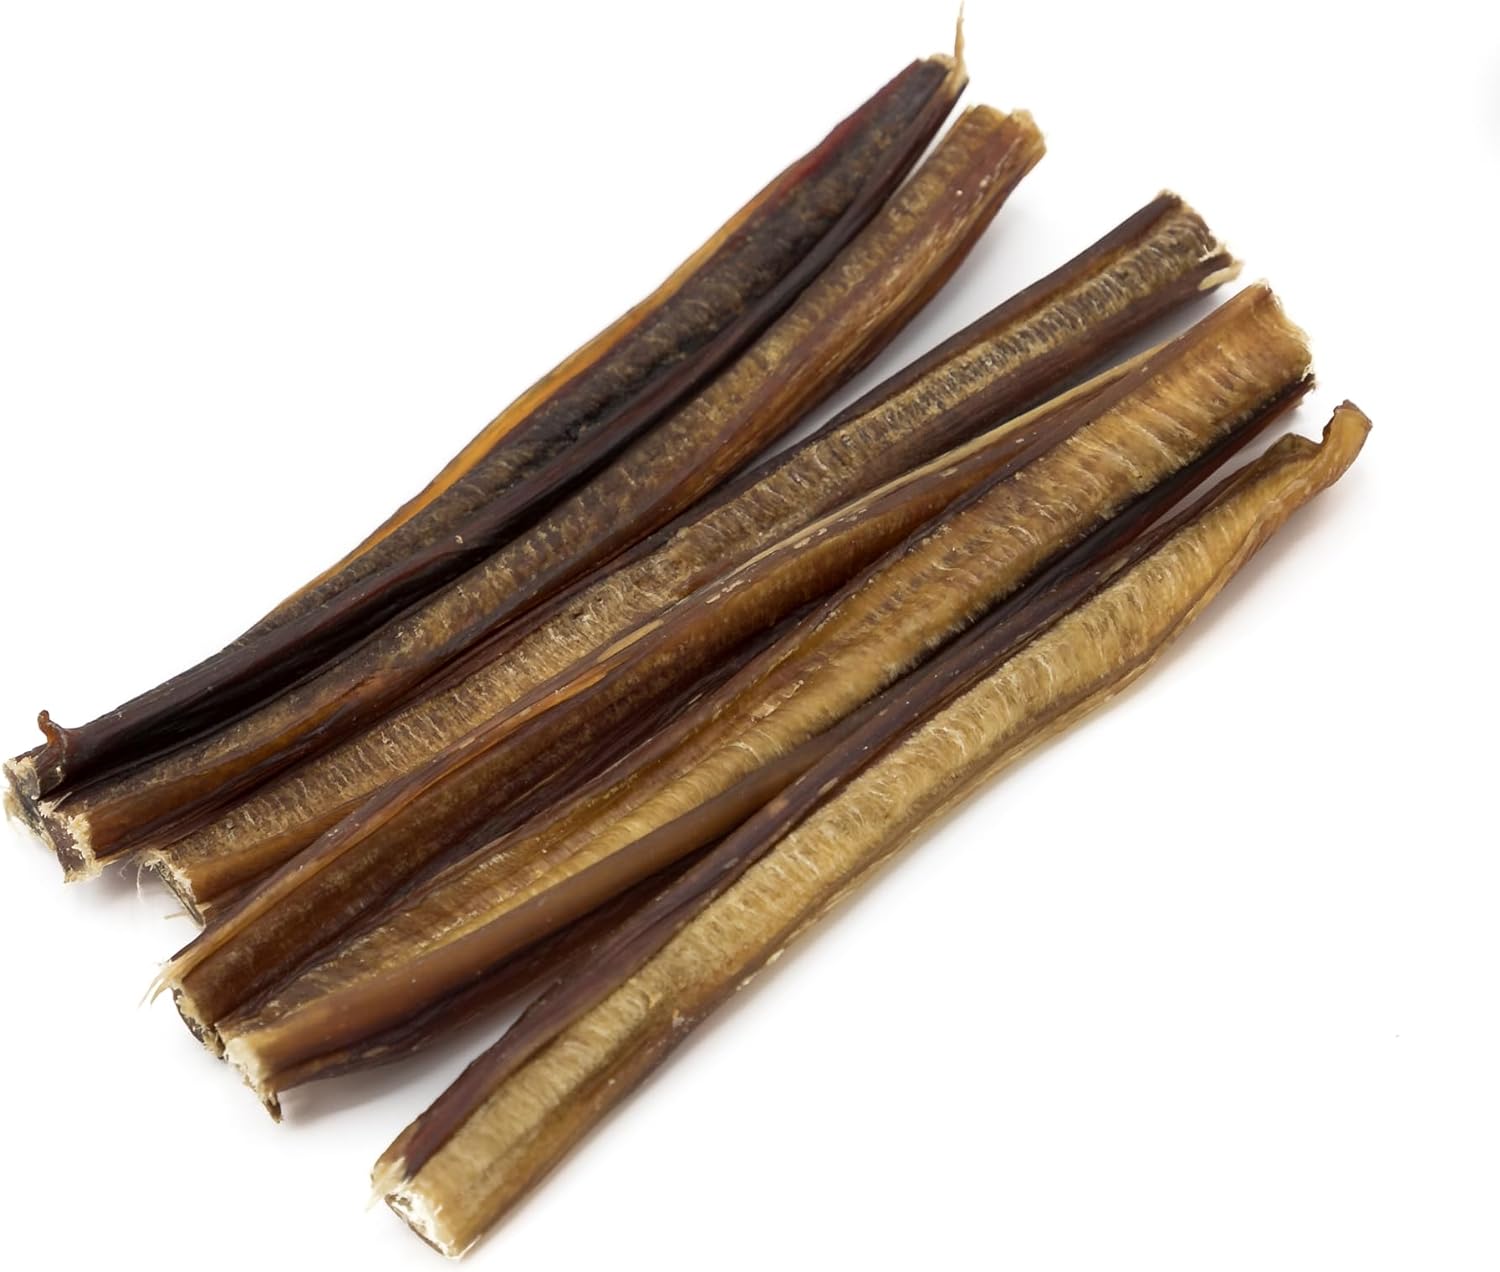 Best Bully Sticks 6 Inch All-Natural Thin Bully Sticks for Dogs - 6” Fully Digestible, 100% Grass-Fed Beef, Grain and Rawhide Free | 24 Pack : Pet Supplies